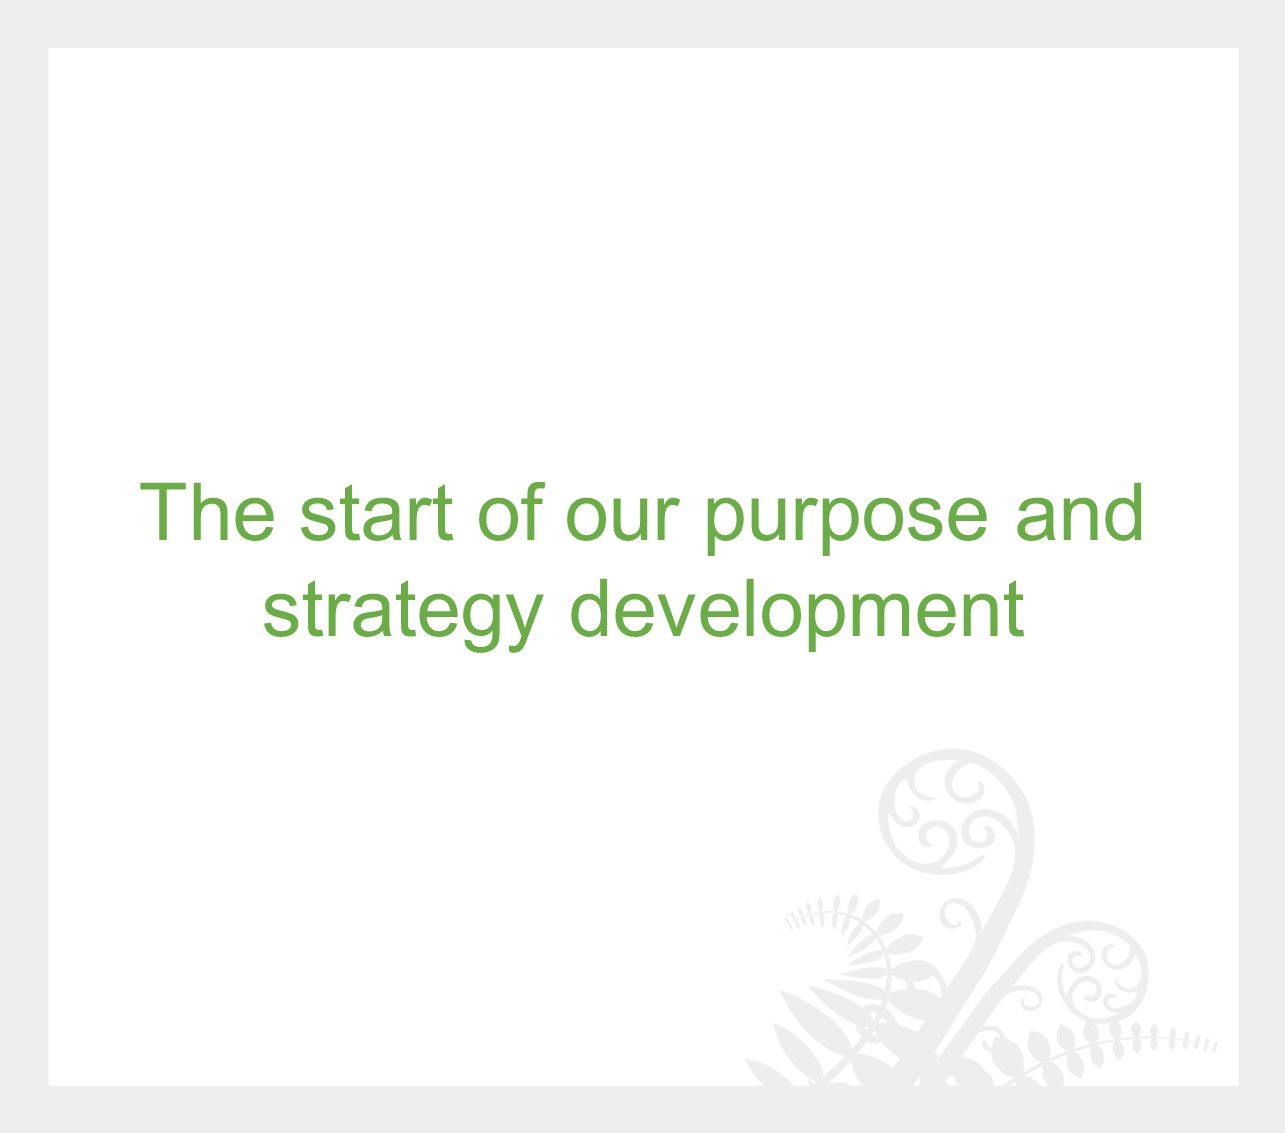 The start of our purpose and strategy development